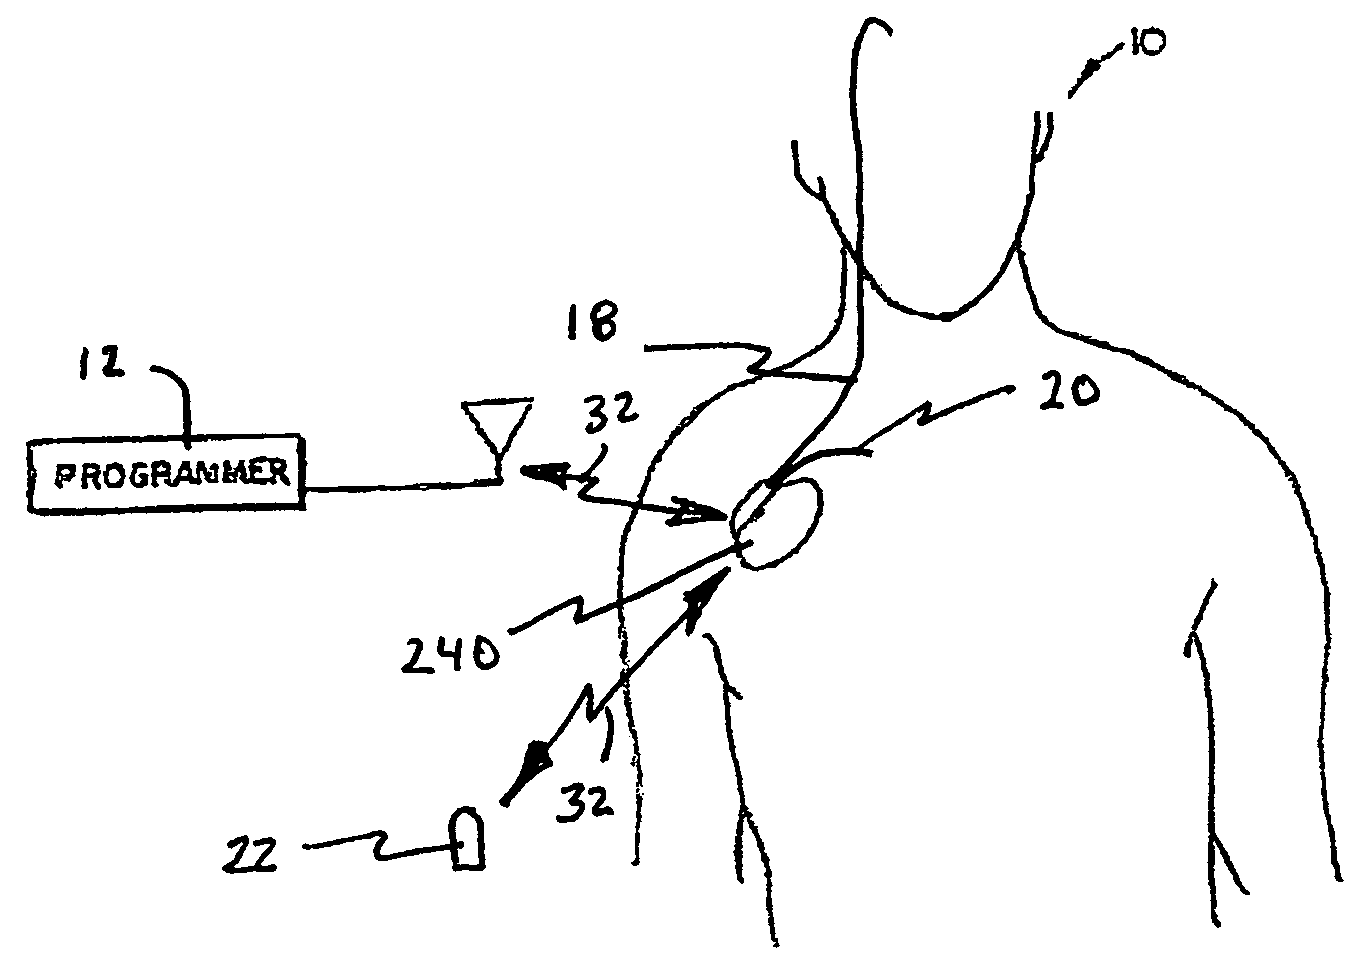 System and method for regulating cardiopulmanary triggered therapy to the brain